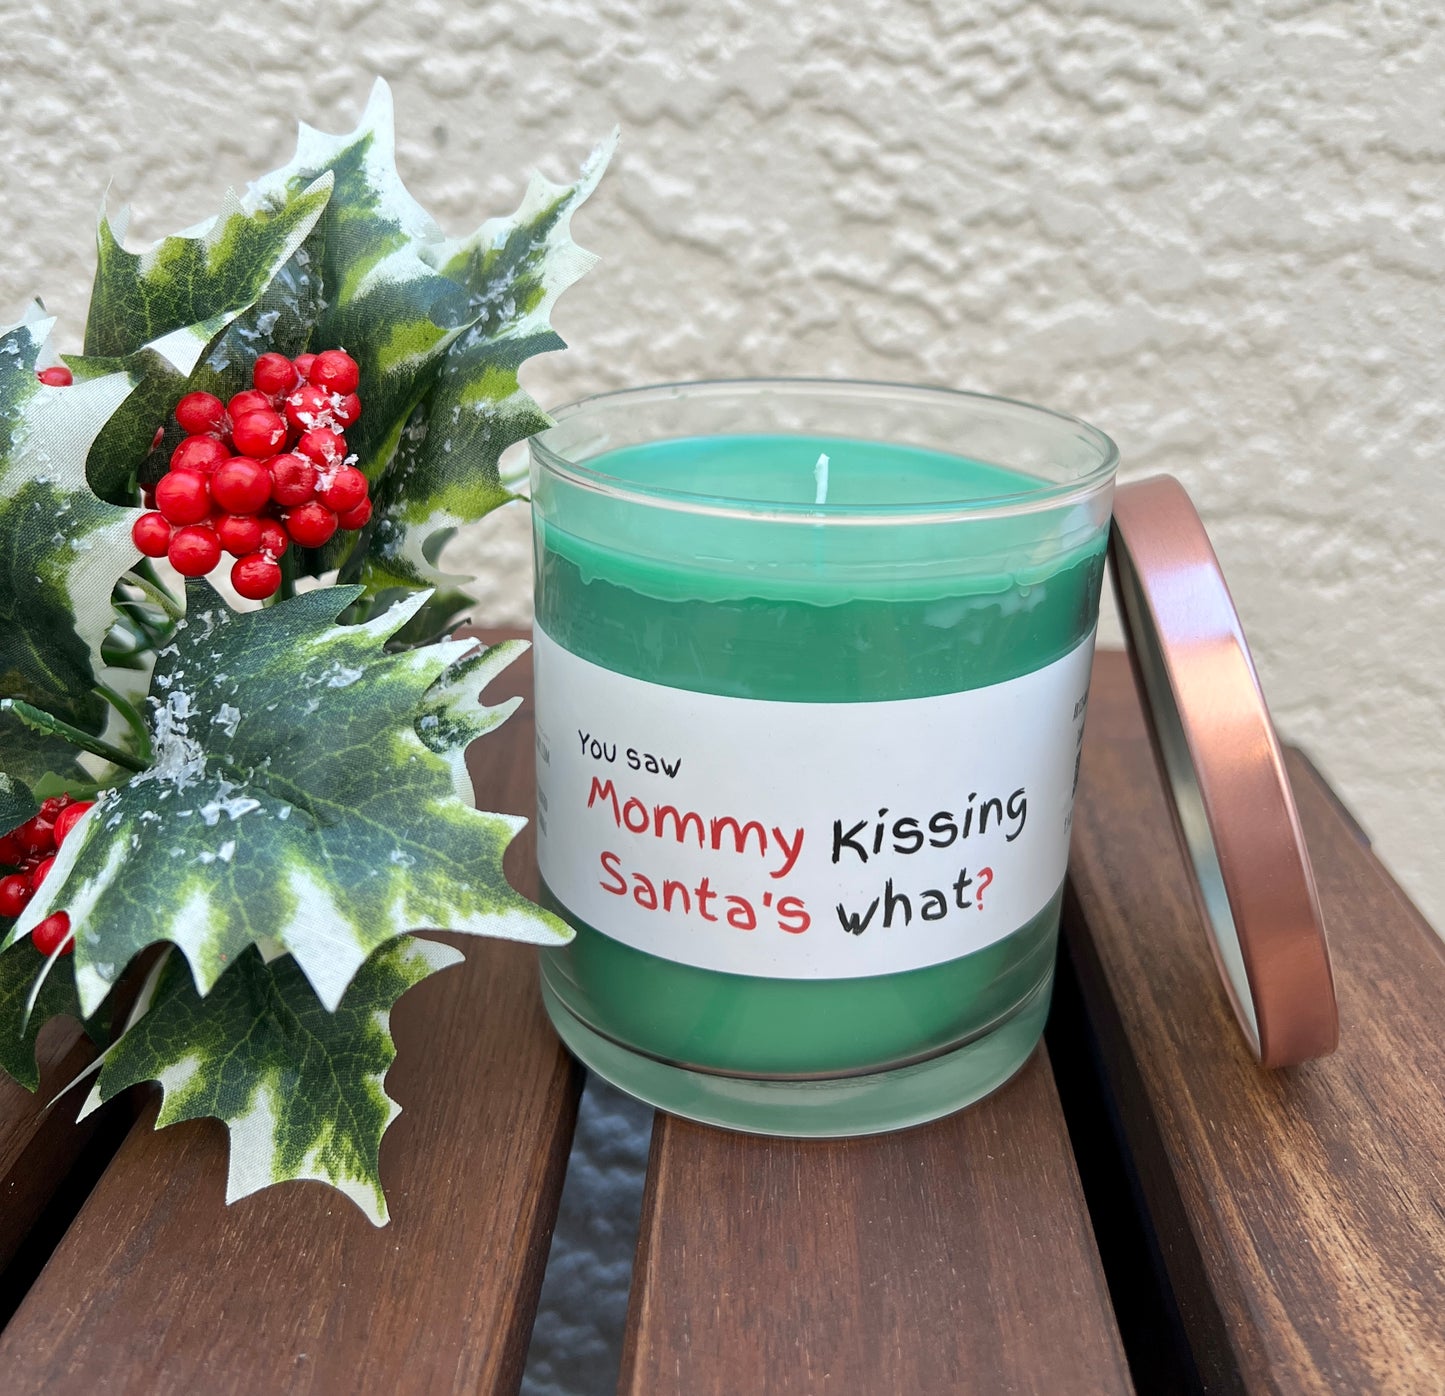 Mommy Kissing Santa's What Candle - Mistletoe scented candle